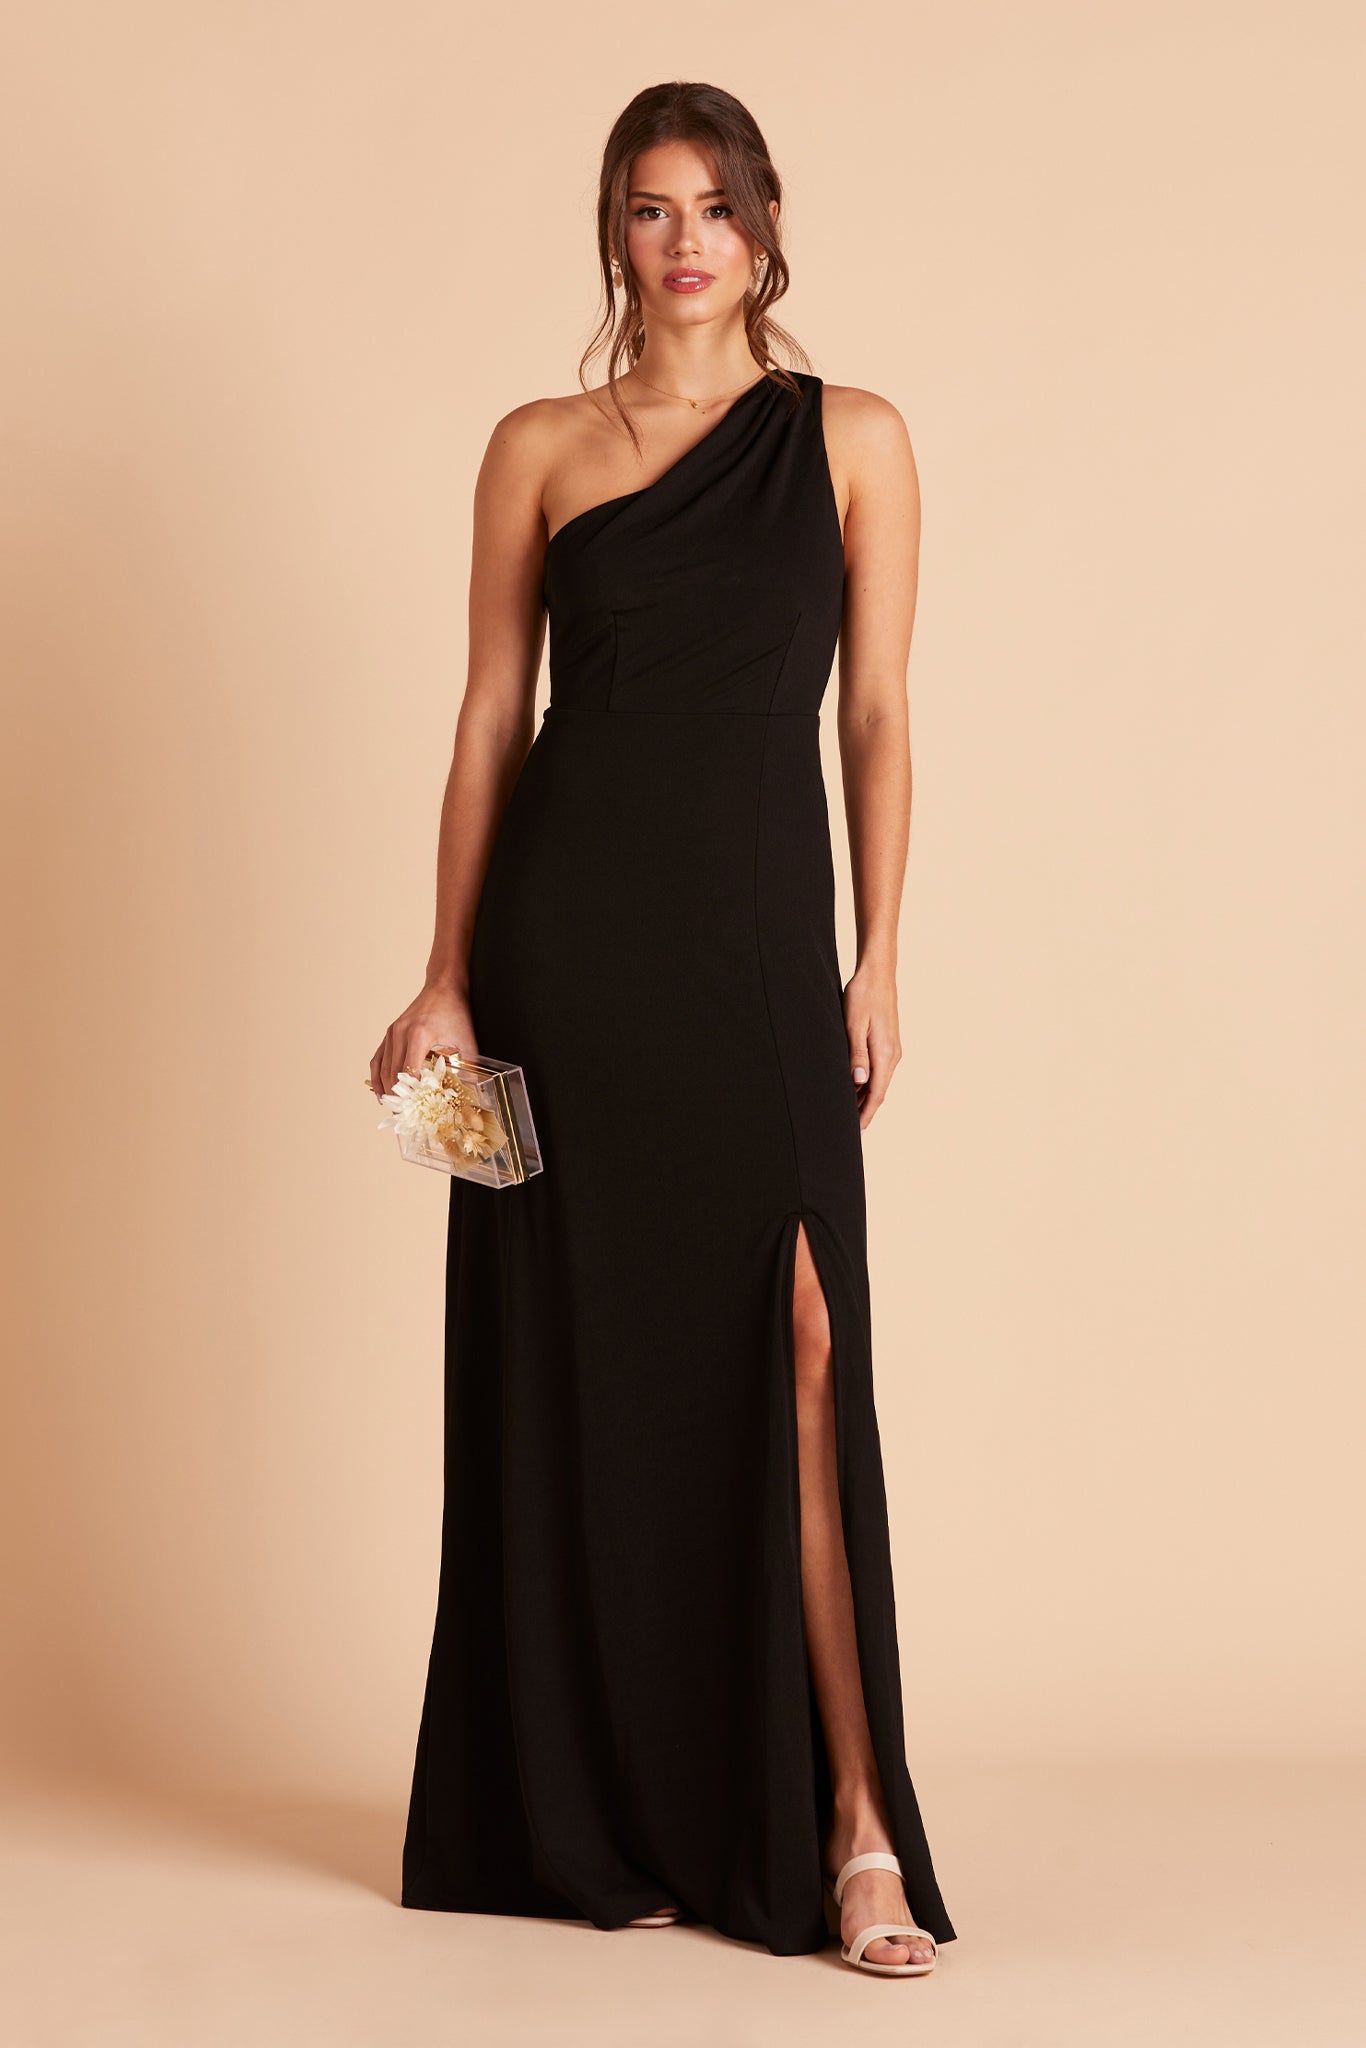 Front view of the Kira Dress in black crepe shows a slender model with a light skin tone wearing an asymmetrical one-shoulder, full-length dress. Soft pleating gathers at the shoulder of the bodice with a smooth fit at the waist as the dress skirt with a slight A-line silhouette flows to the floor. 